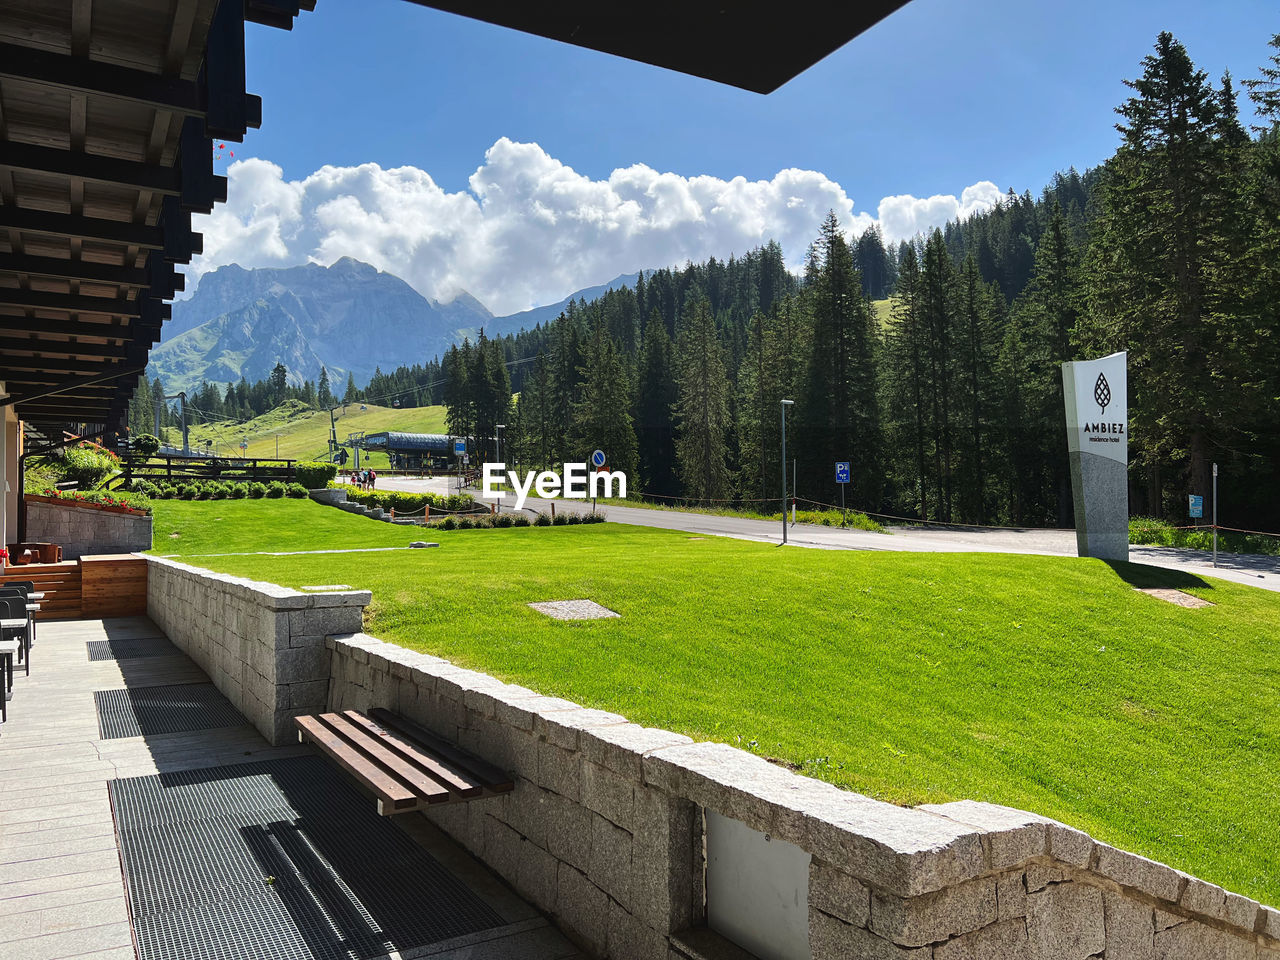 plant, grass, mountain, sky, architecture, tree, nature, beauty in nature, scenics - nature, built structure, green, travel destinations, landscape, estate, environment, mountain range, no people, tranquility, land, building exterior, travel, tranquil scene, day, sports, building, house, leisure activity, outdoors, coniferous tree, tourism, sport venue, cloud, summer, lawn, sunlight